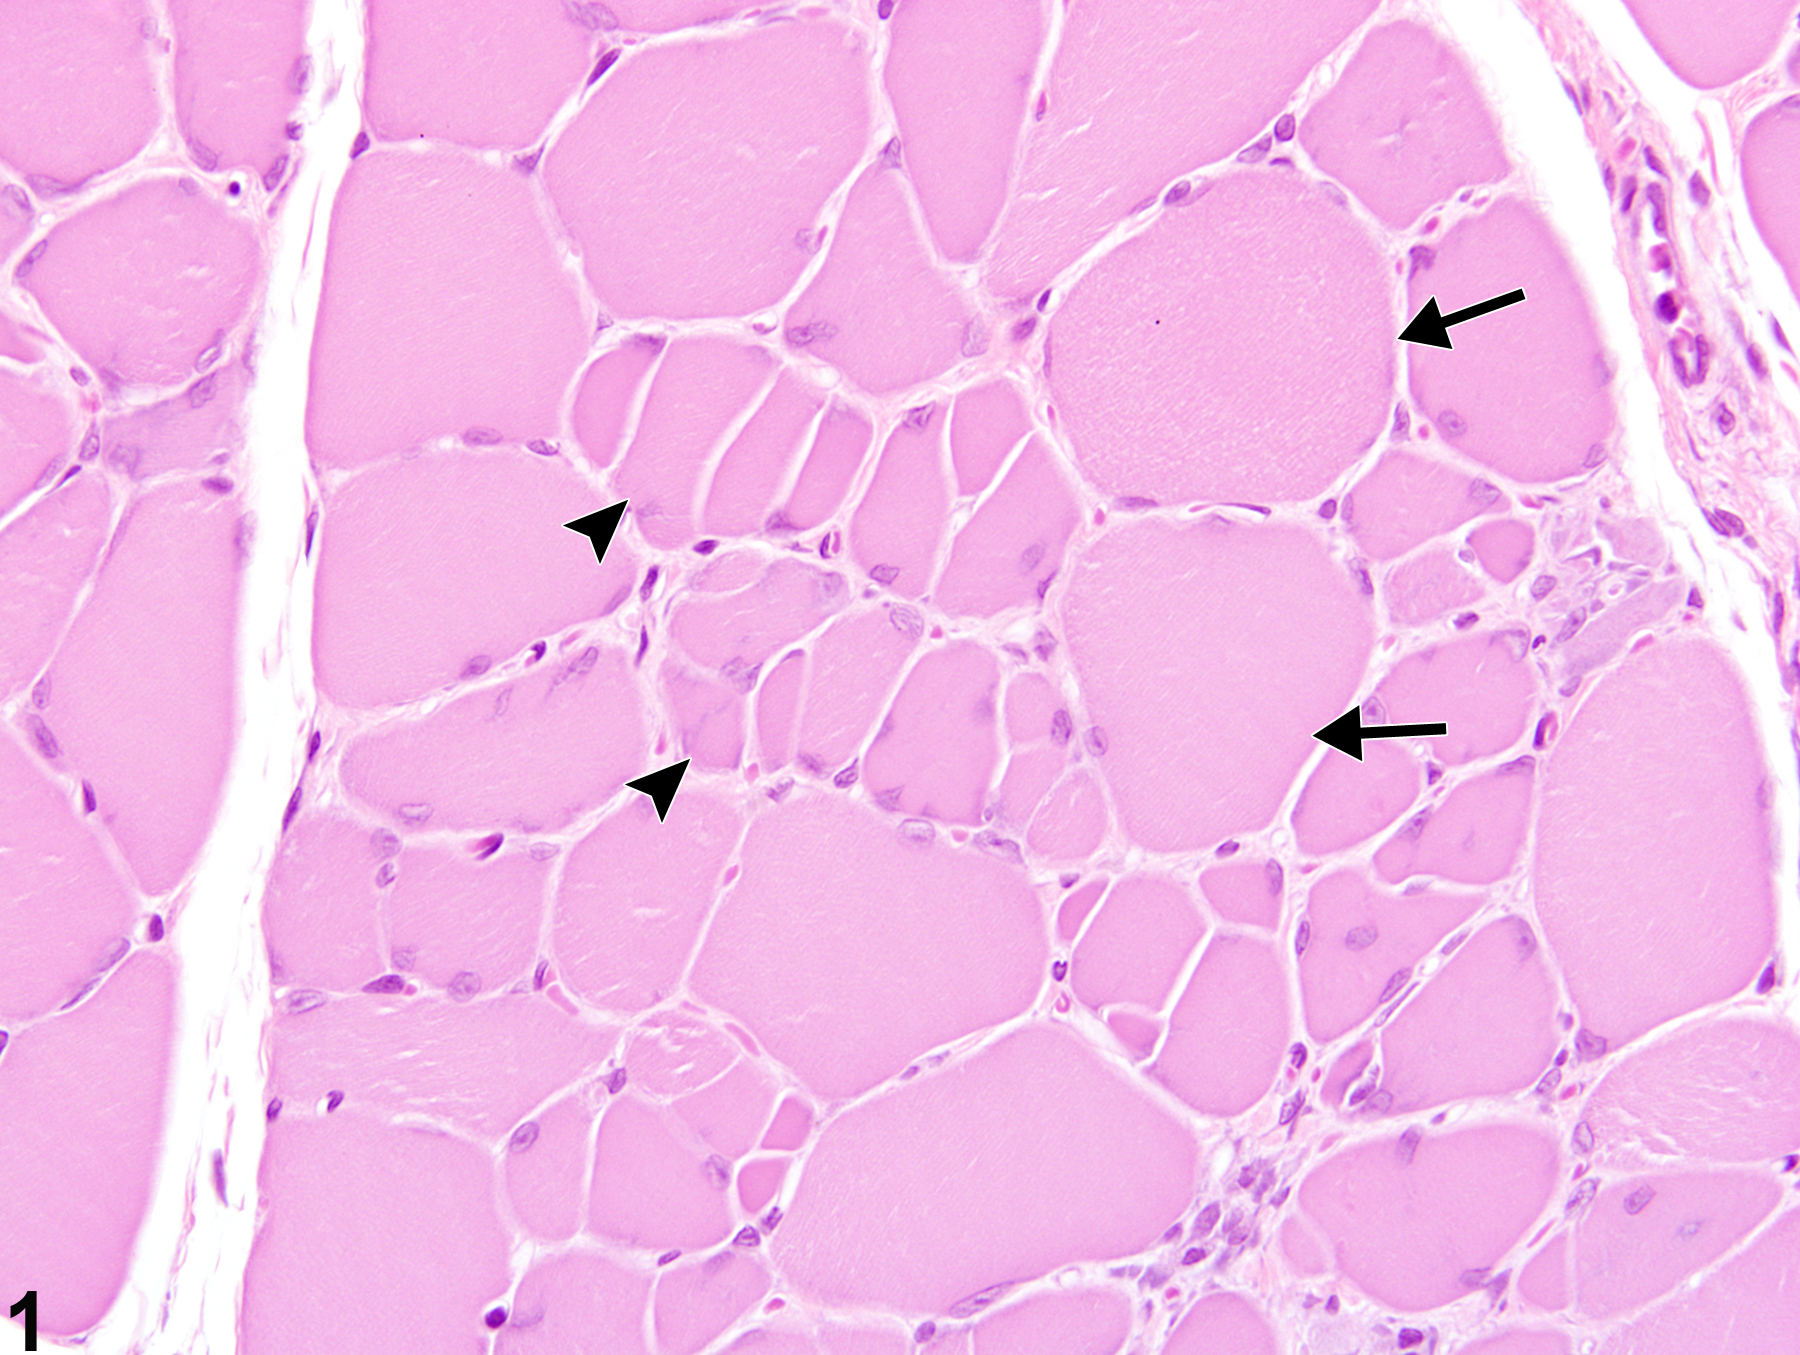 Image of hypertrophy in the skeletal muscle from a male Harlan Sprague-Dawley rat in a subchronic study